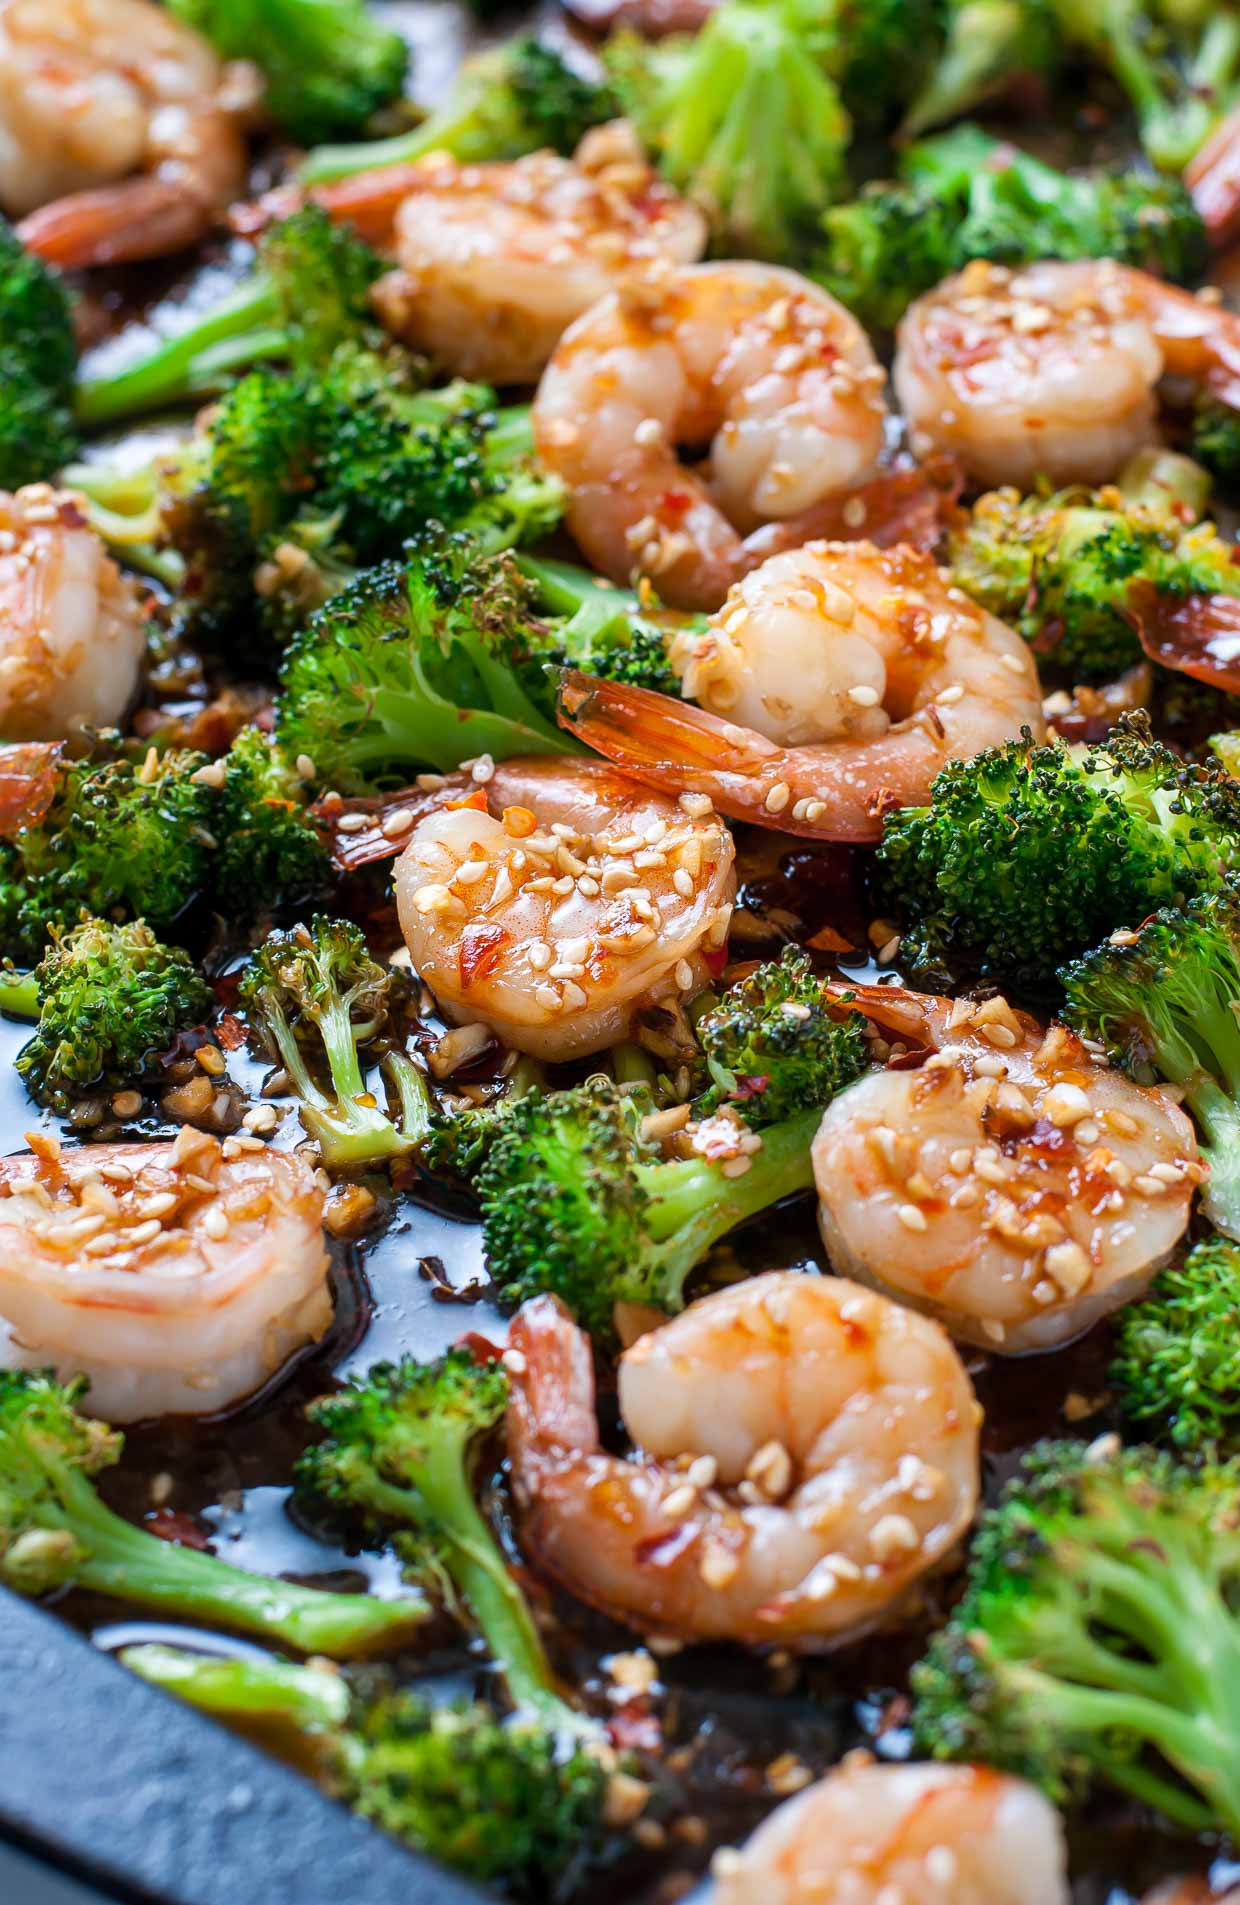 Flavorful roasted broccoli and tender, juicy shrimp join forces in this super easy Sheet Pan Roasted Honey Garlic Shrimp and Broccoli. This one pan wonder makes a great fuss-free weeknight dinner!